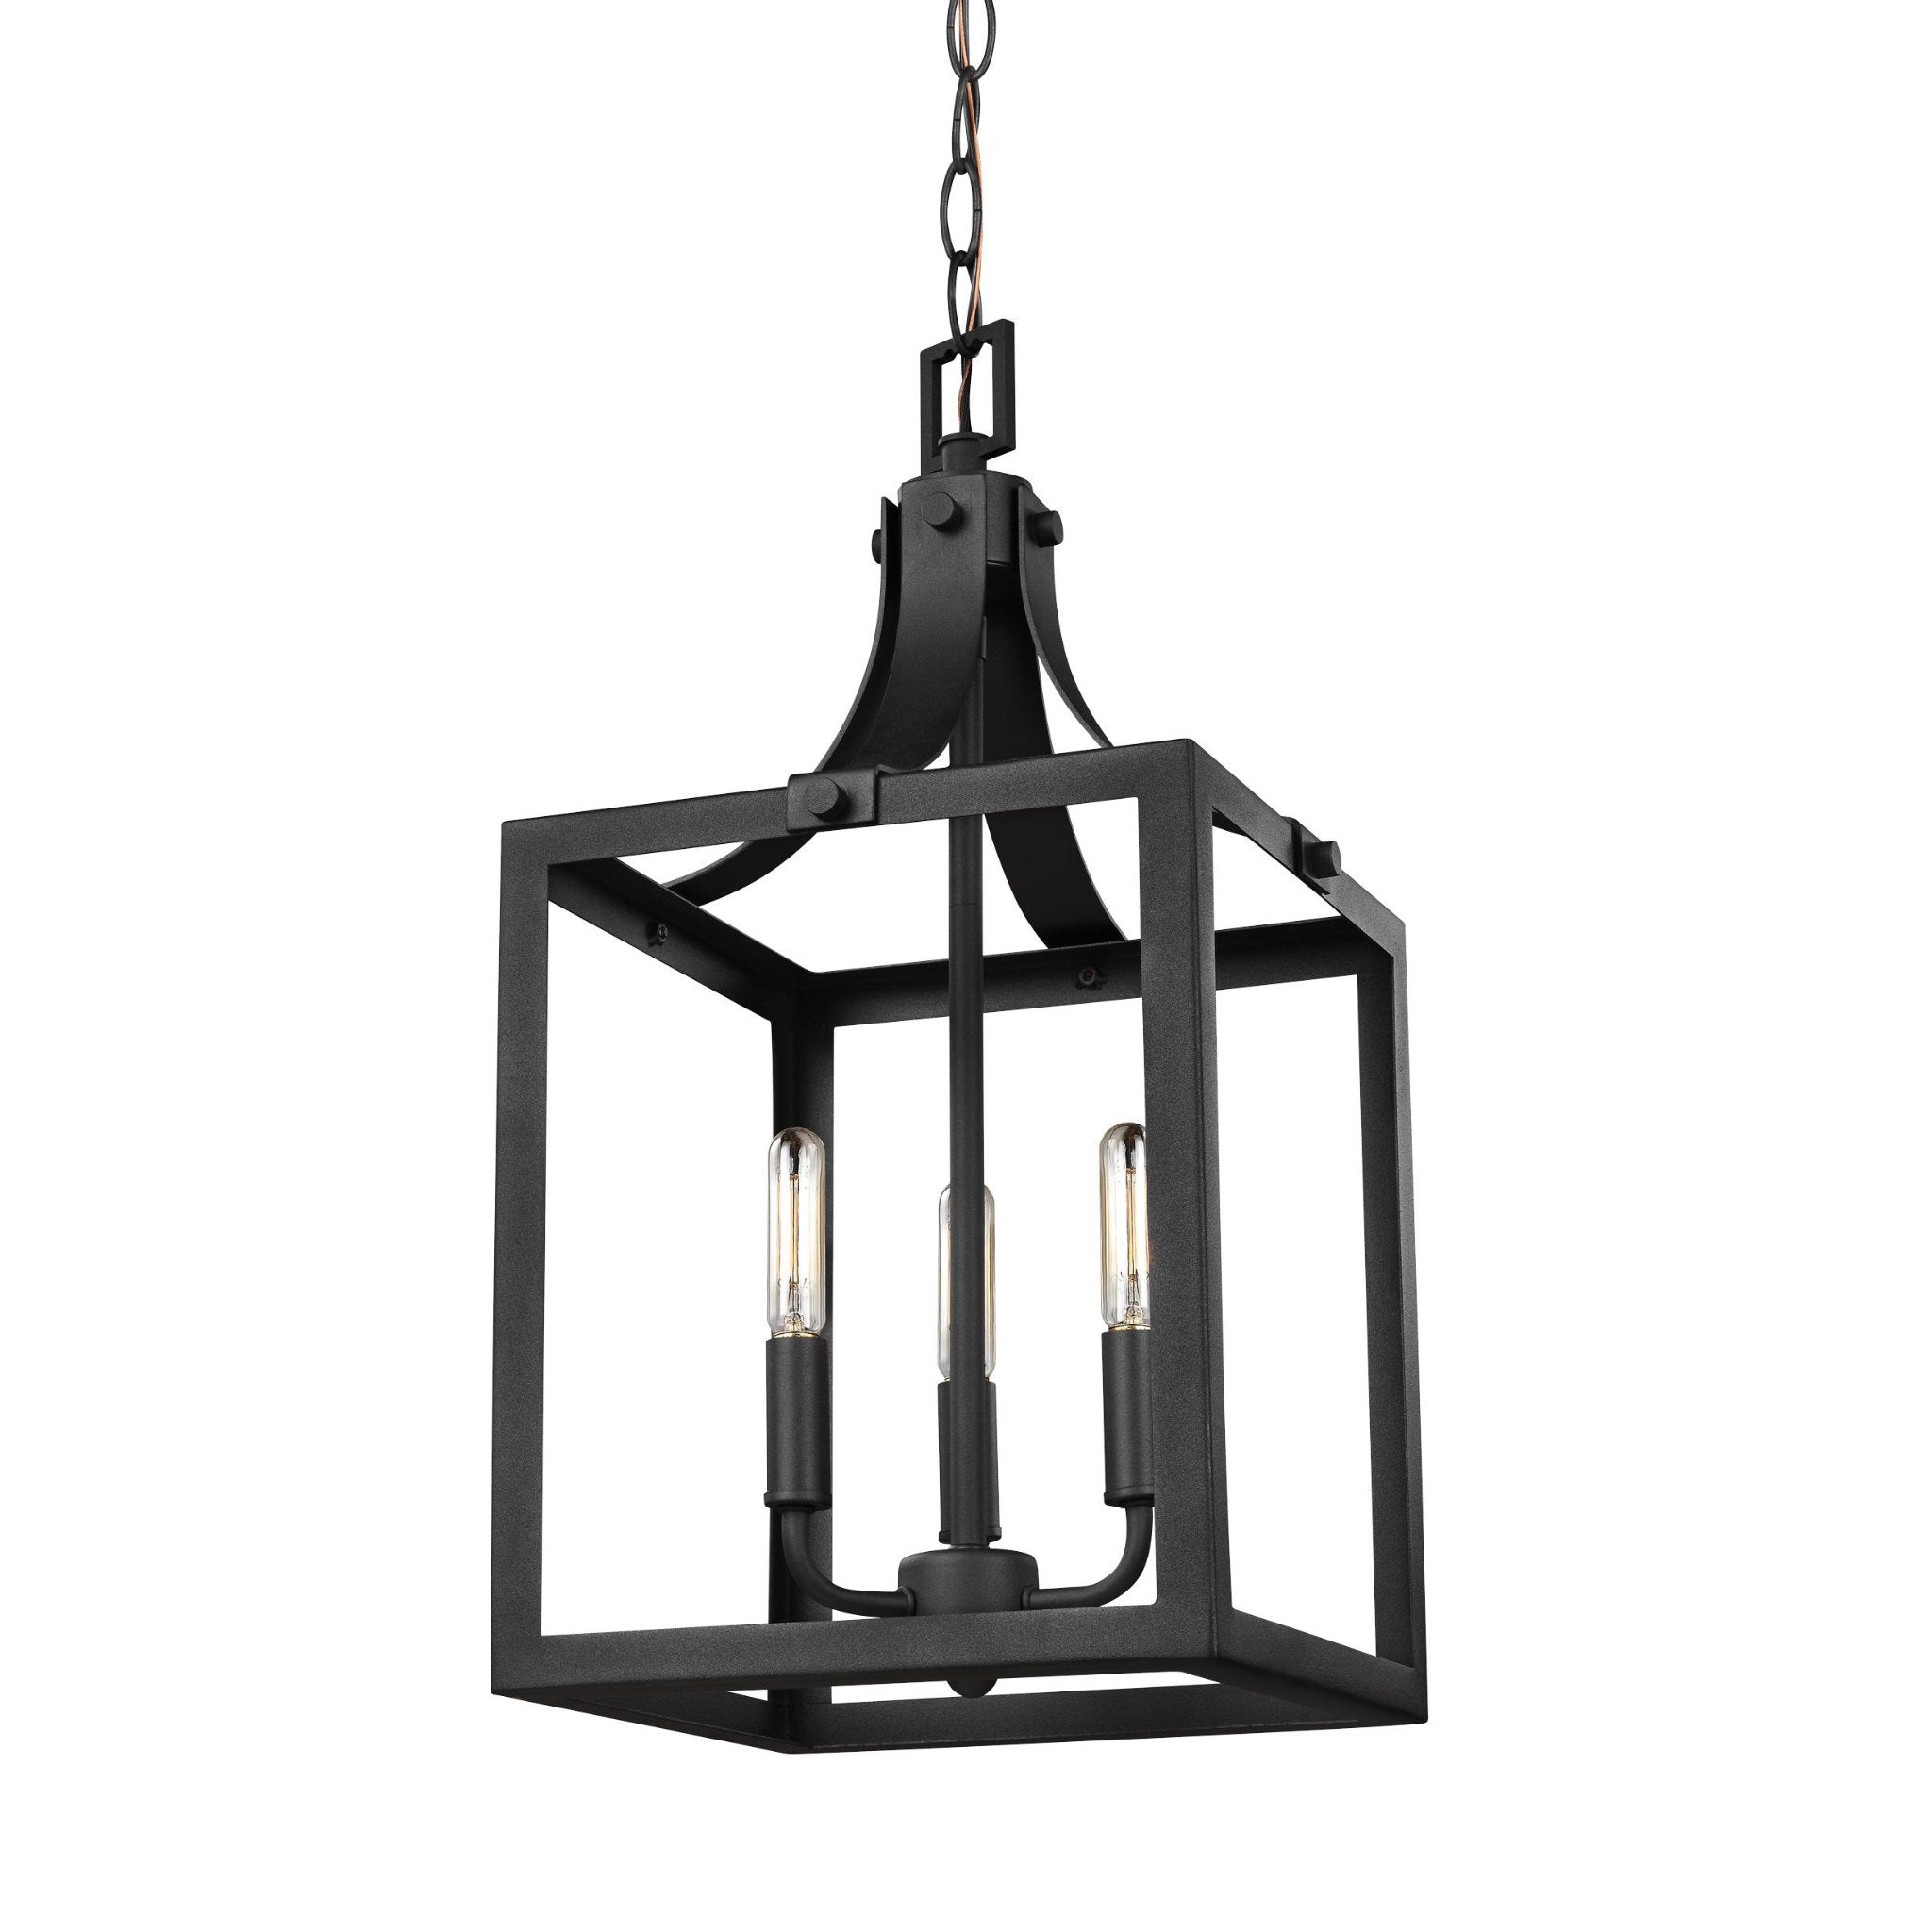 Labette Small Three Light Hall / Foyer Traditional Pendant 10" Width 19.75" Height Steel in Black